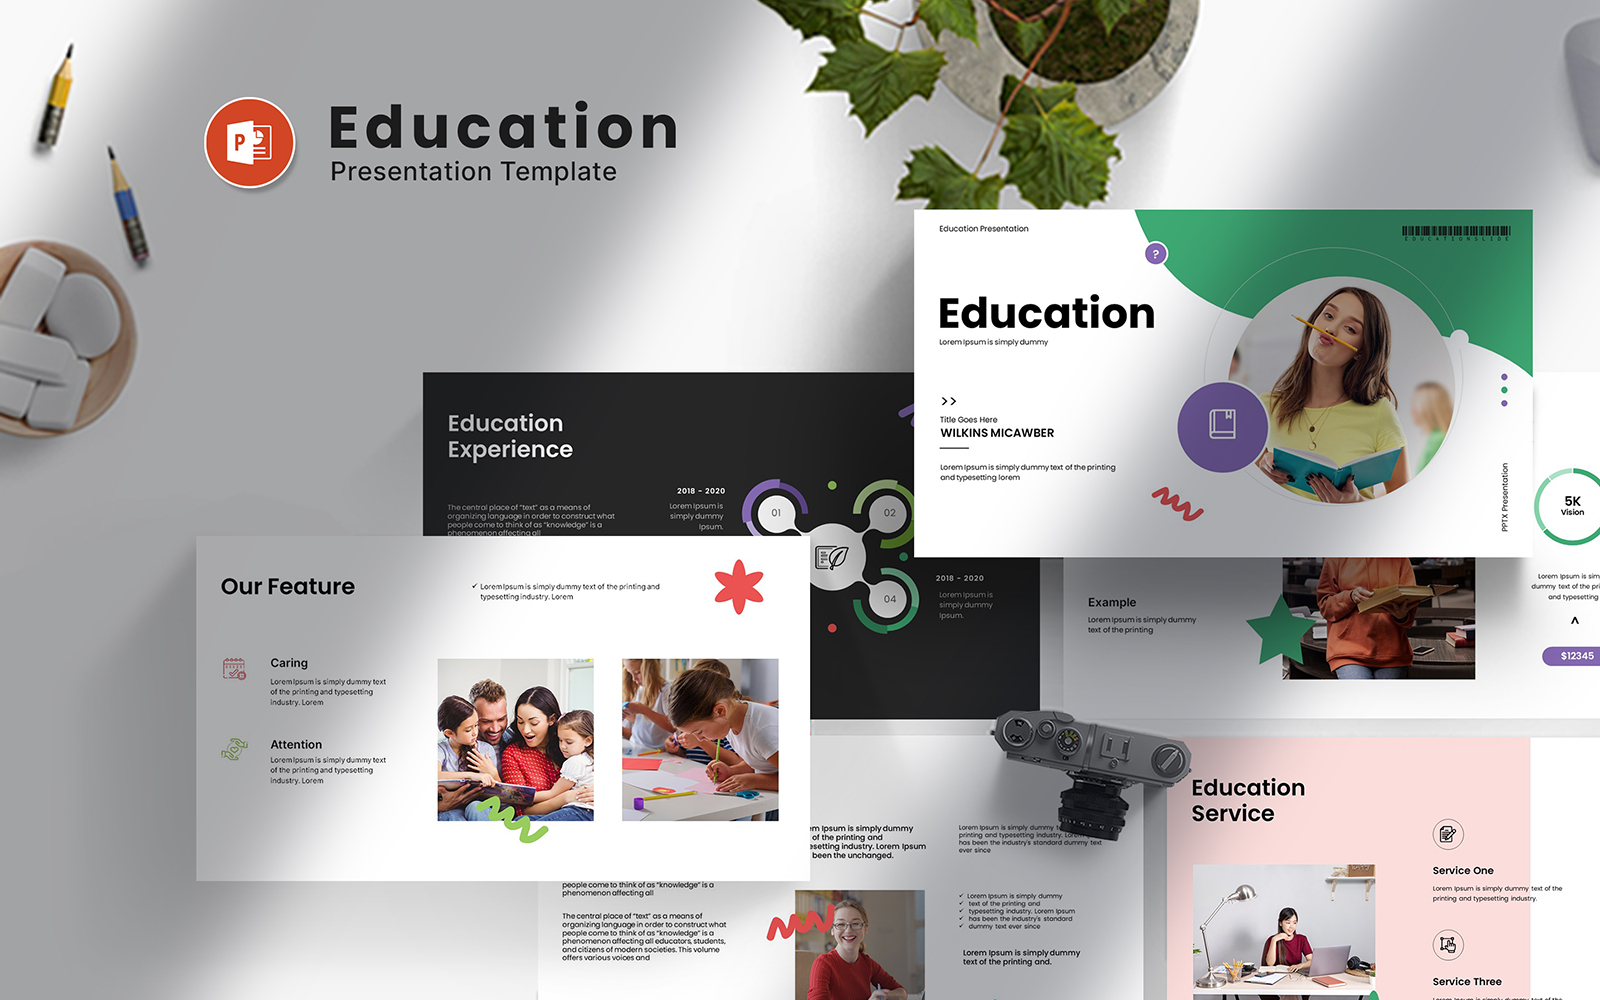 The Education PowerPoint Presentation